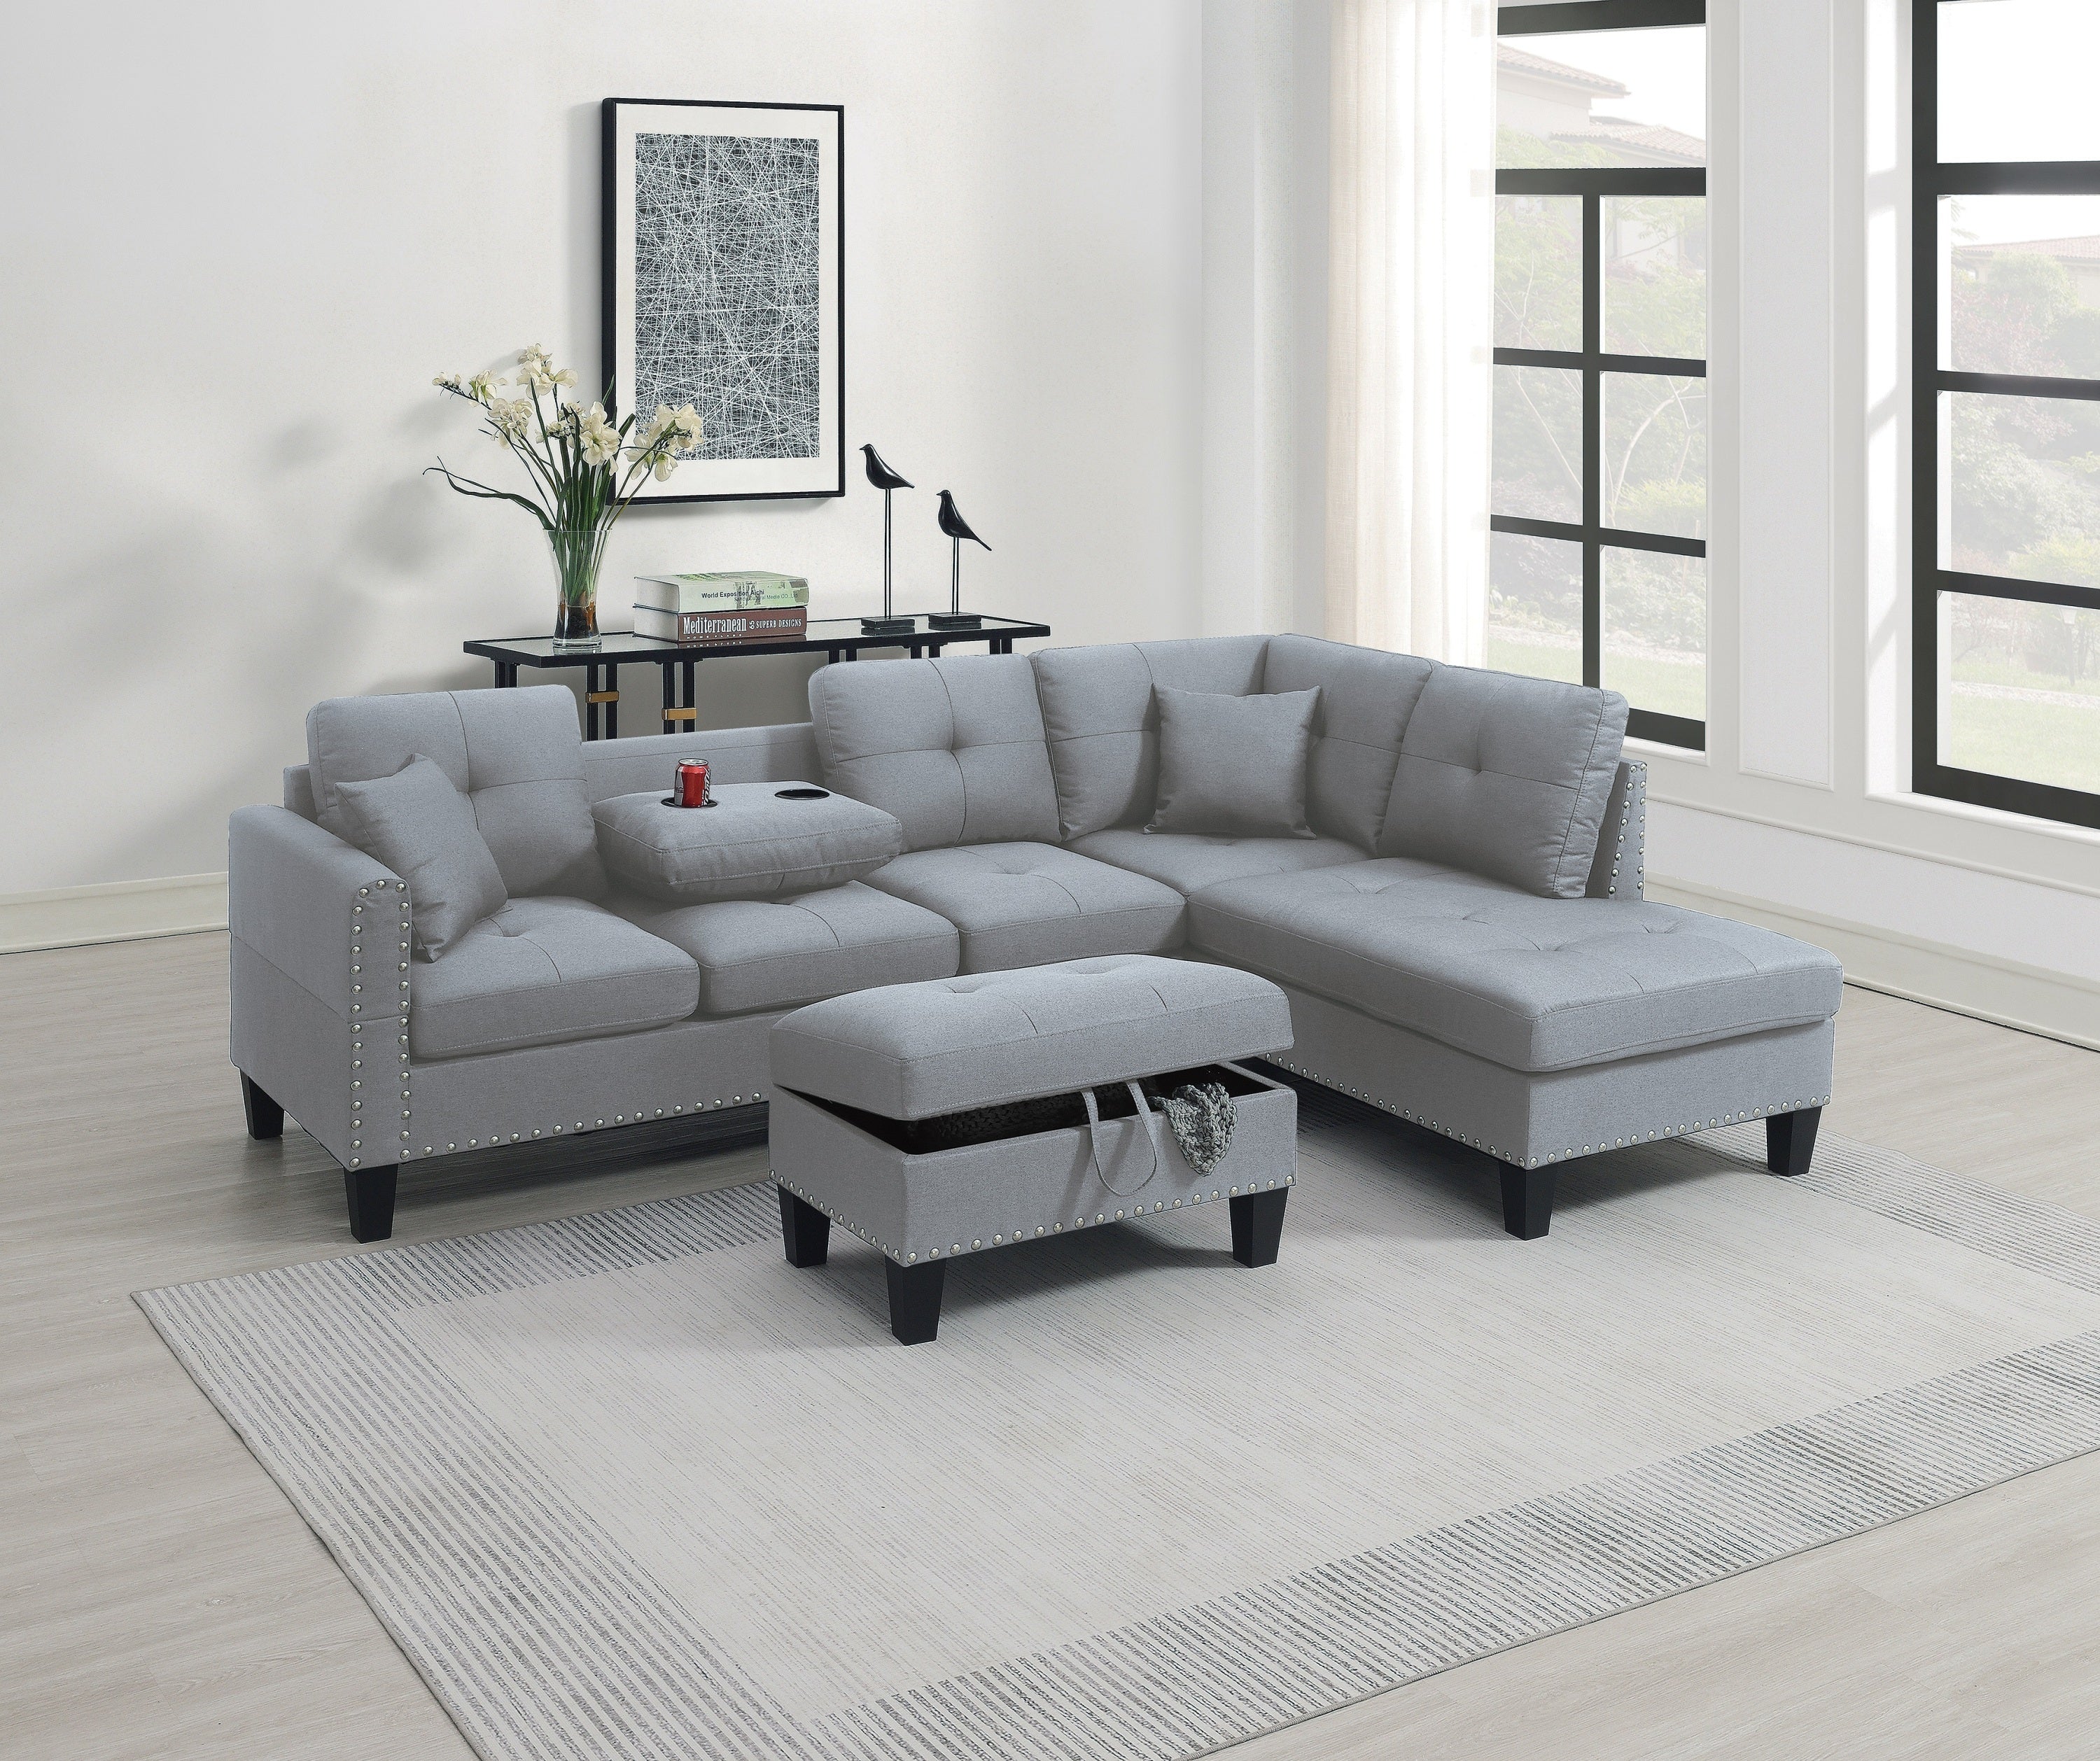 Taupe Grey 3-Piece L Shaped Sectional Sofa w/ Storage Ottoman-Stationary Sectionals-American Furniture Outlet